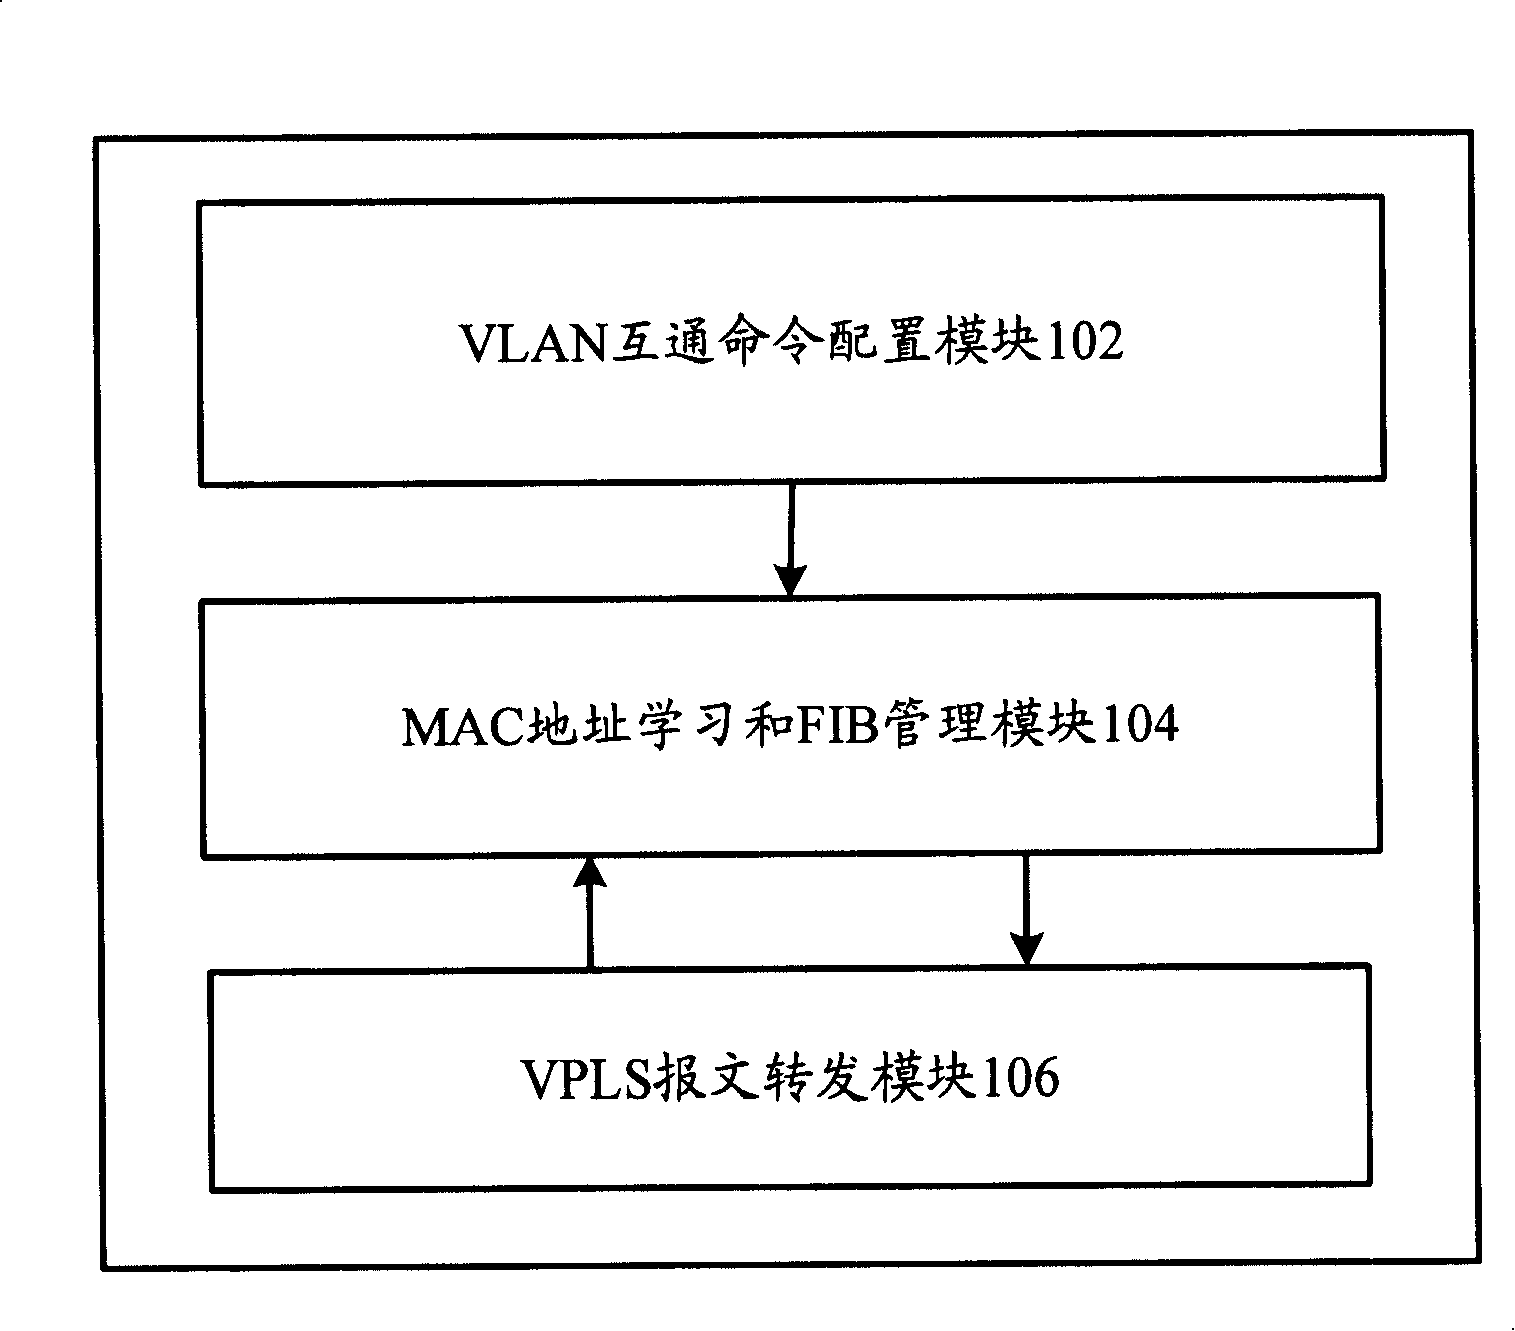 User grouping intercommunication/isolation device in virtual special network service